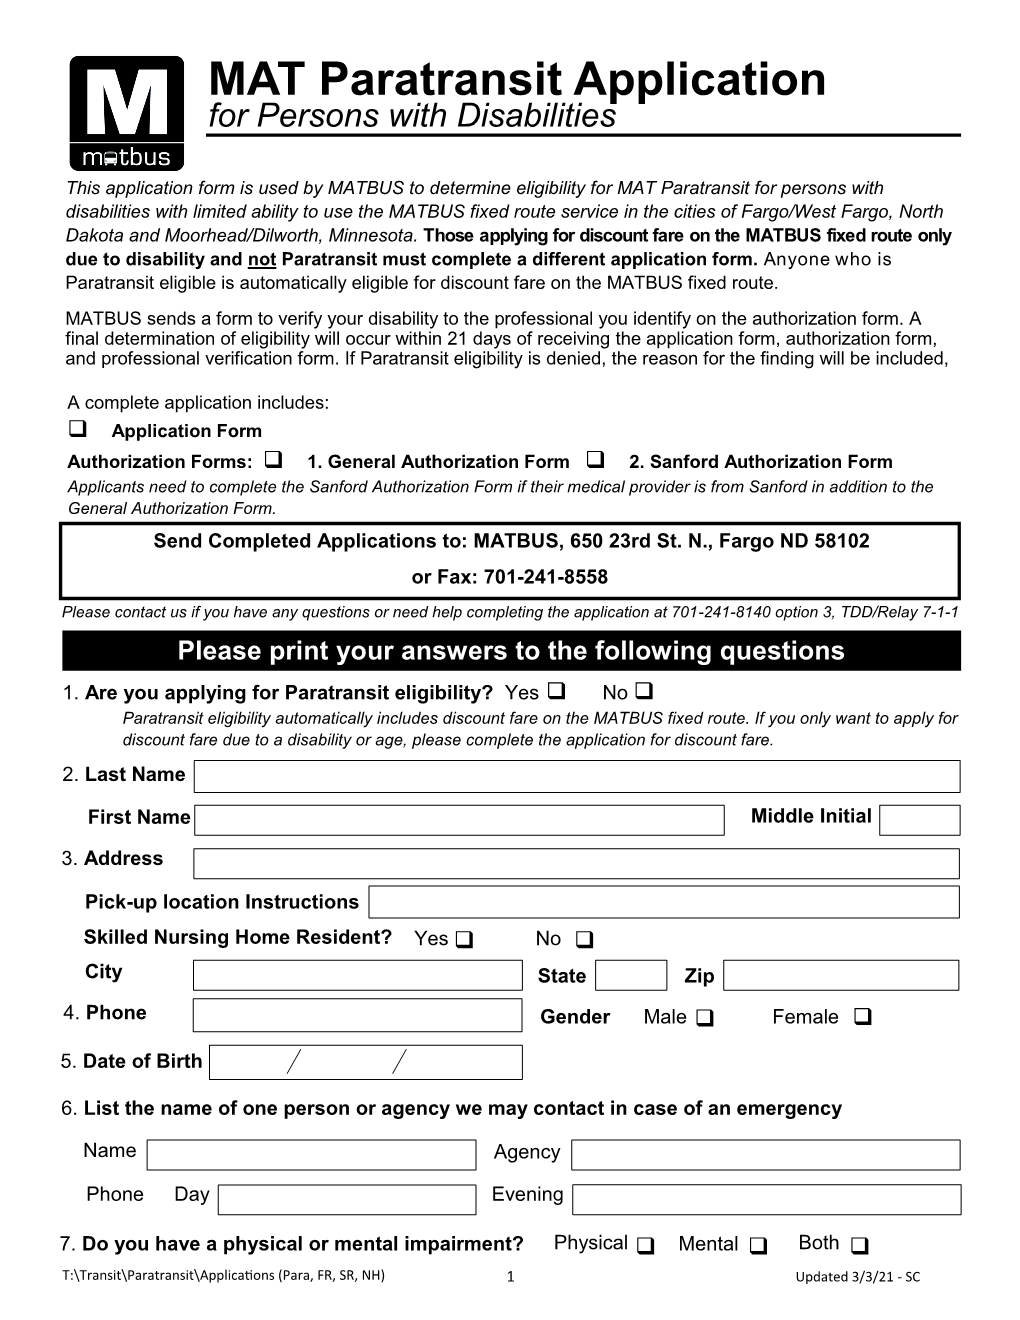 MAT Paratransit Application for Persons with Disabilities